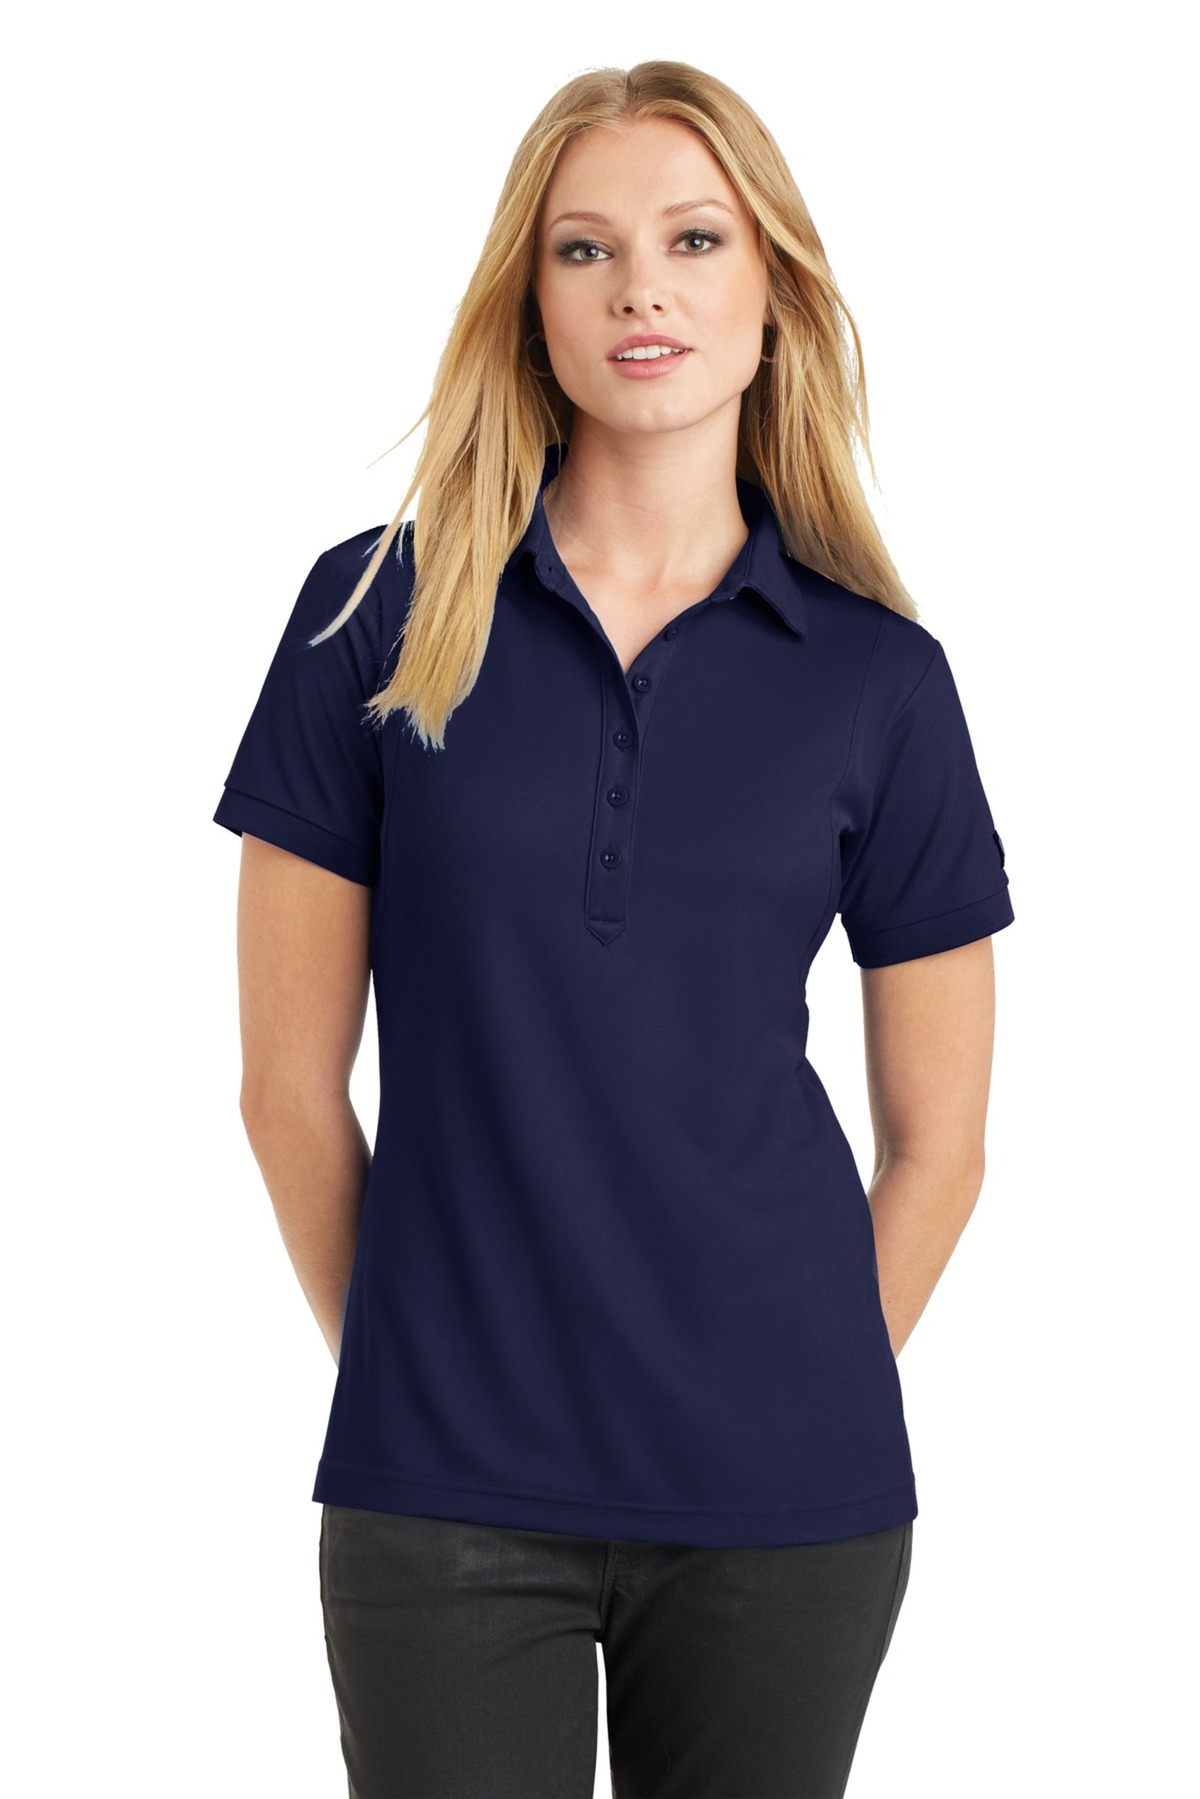 OGIO Embroidered Women's Jewel High Performance Polo | Polos - Queensboro